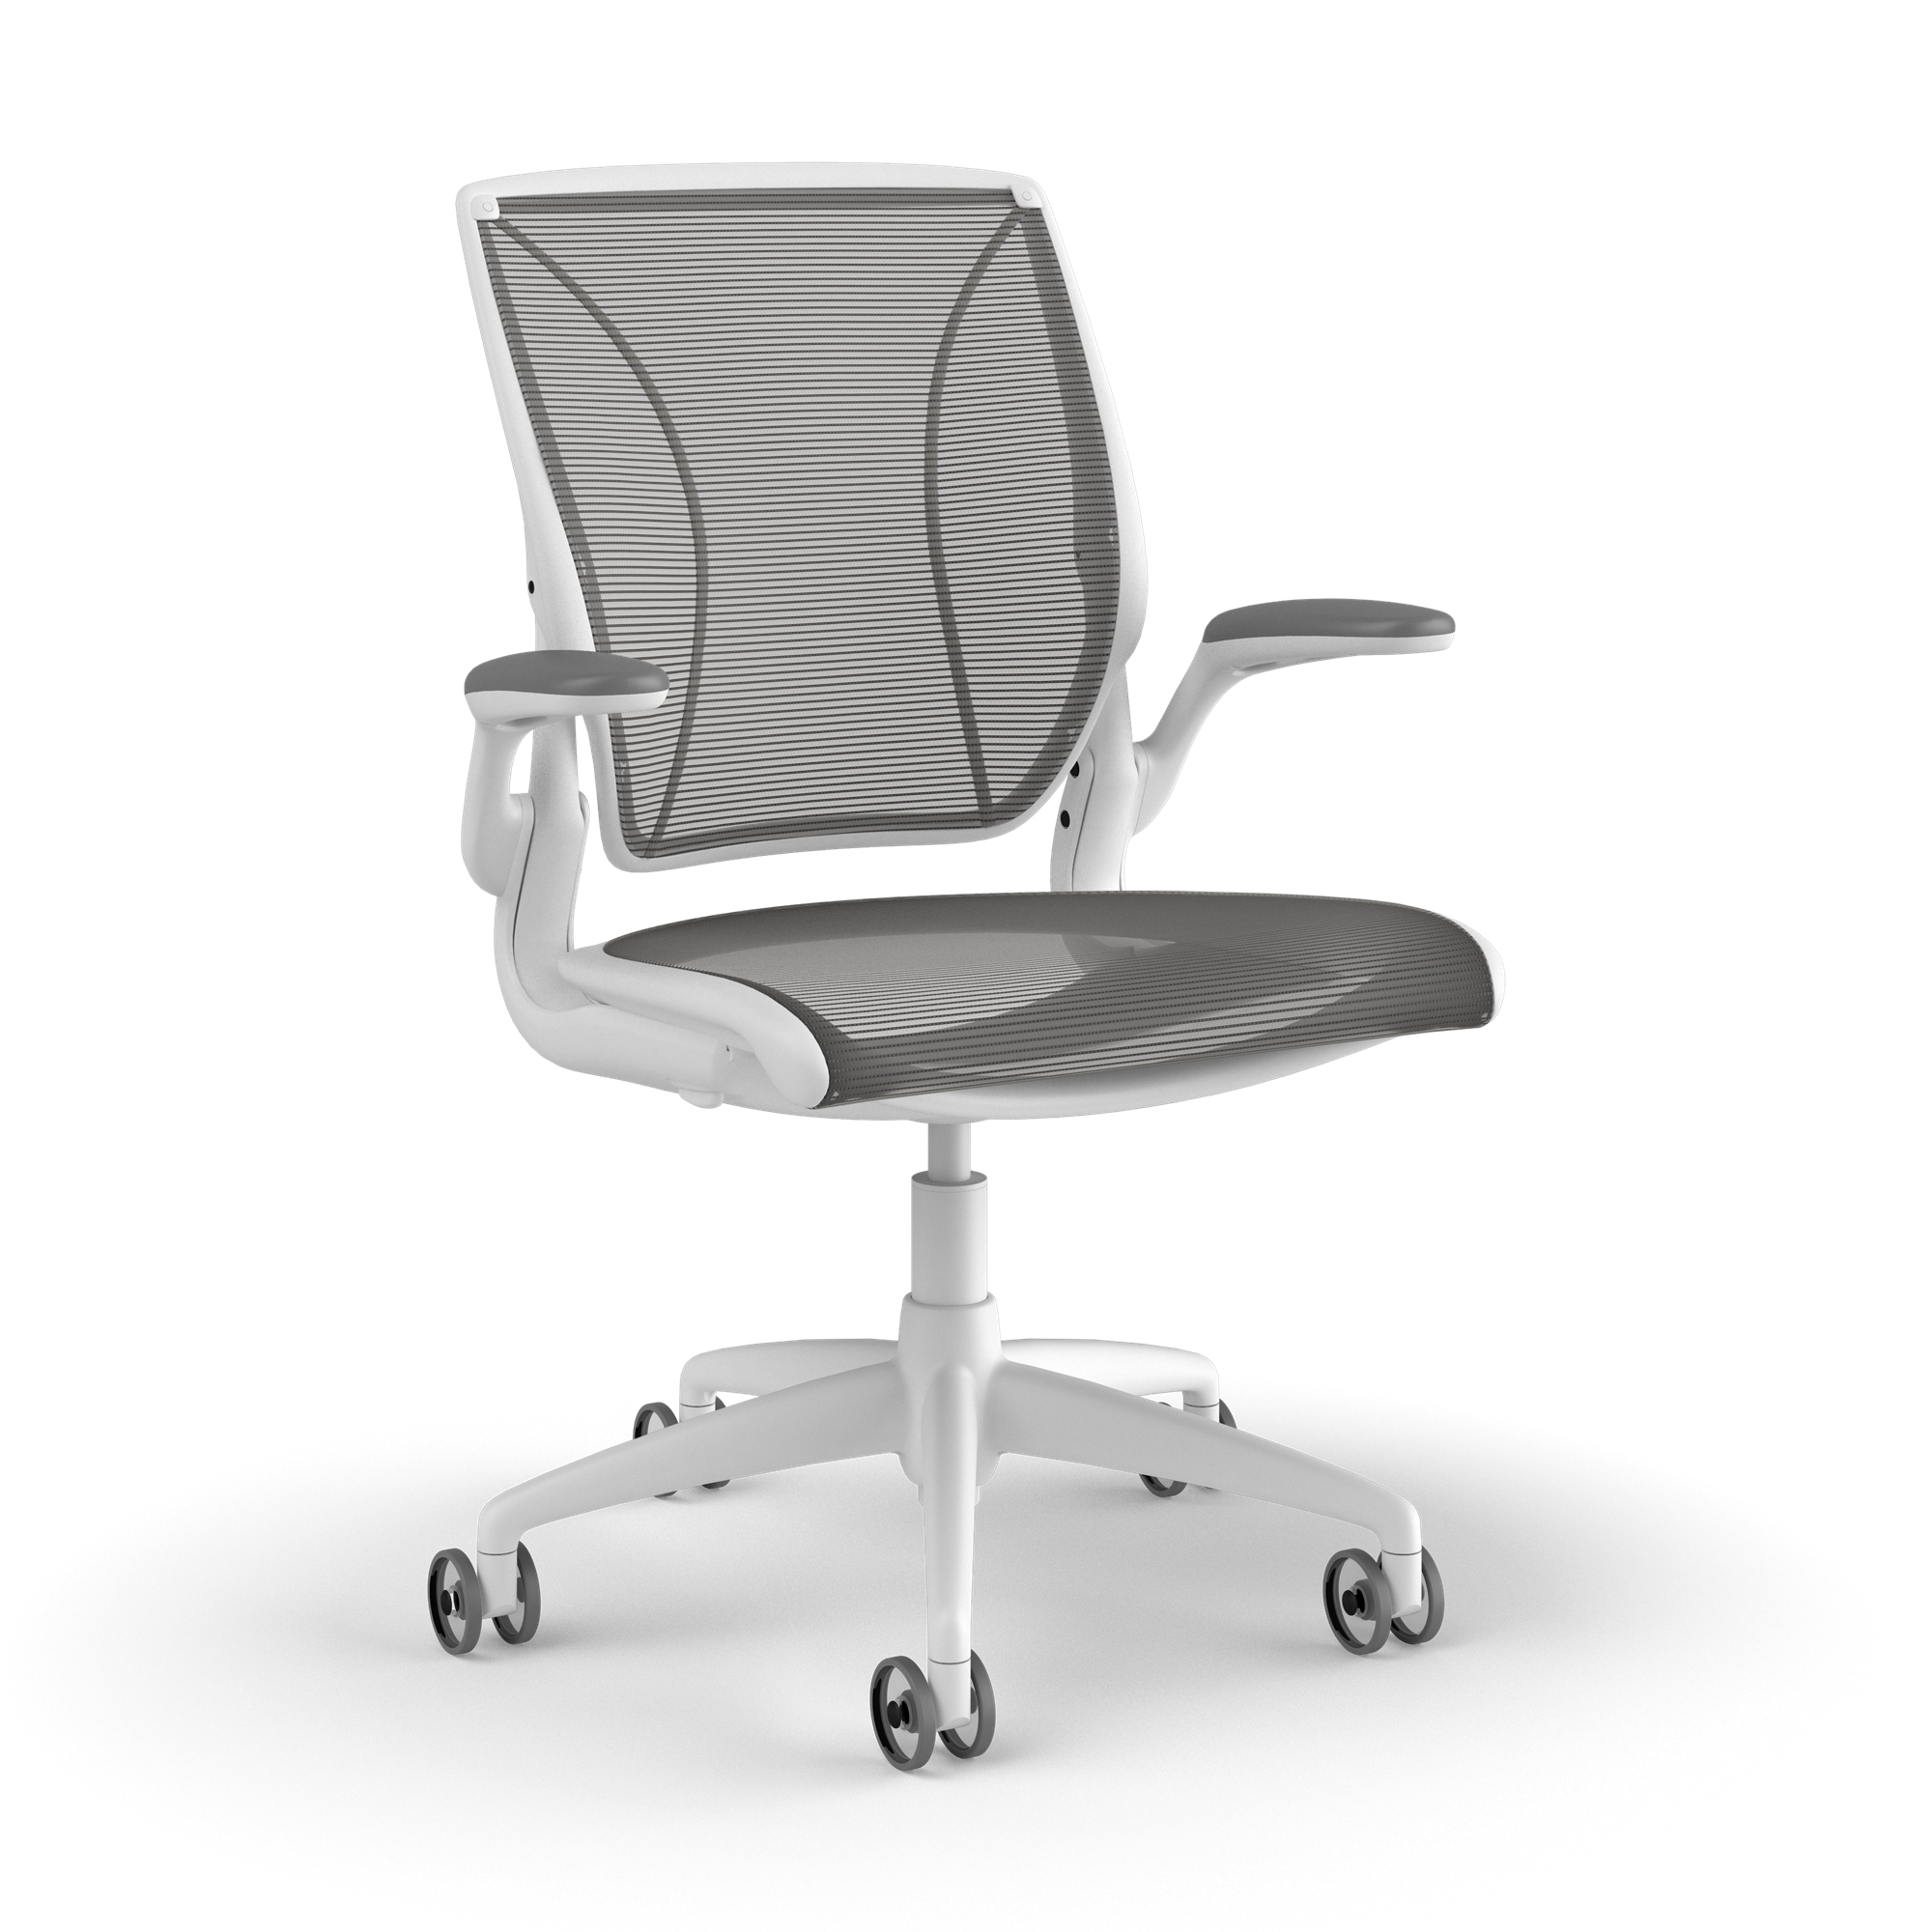 World Task Chair, Fixed Arms